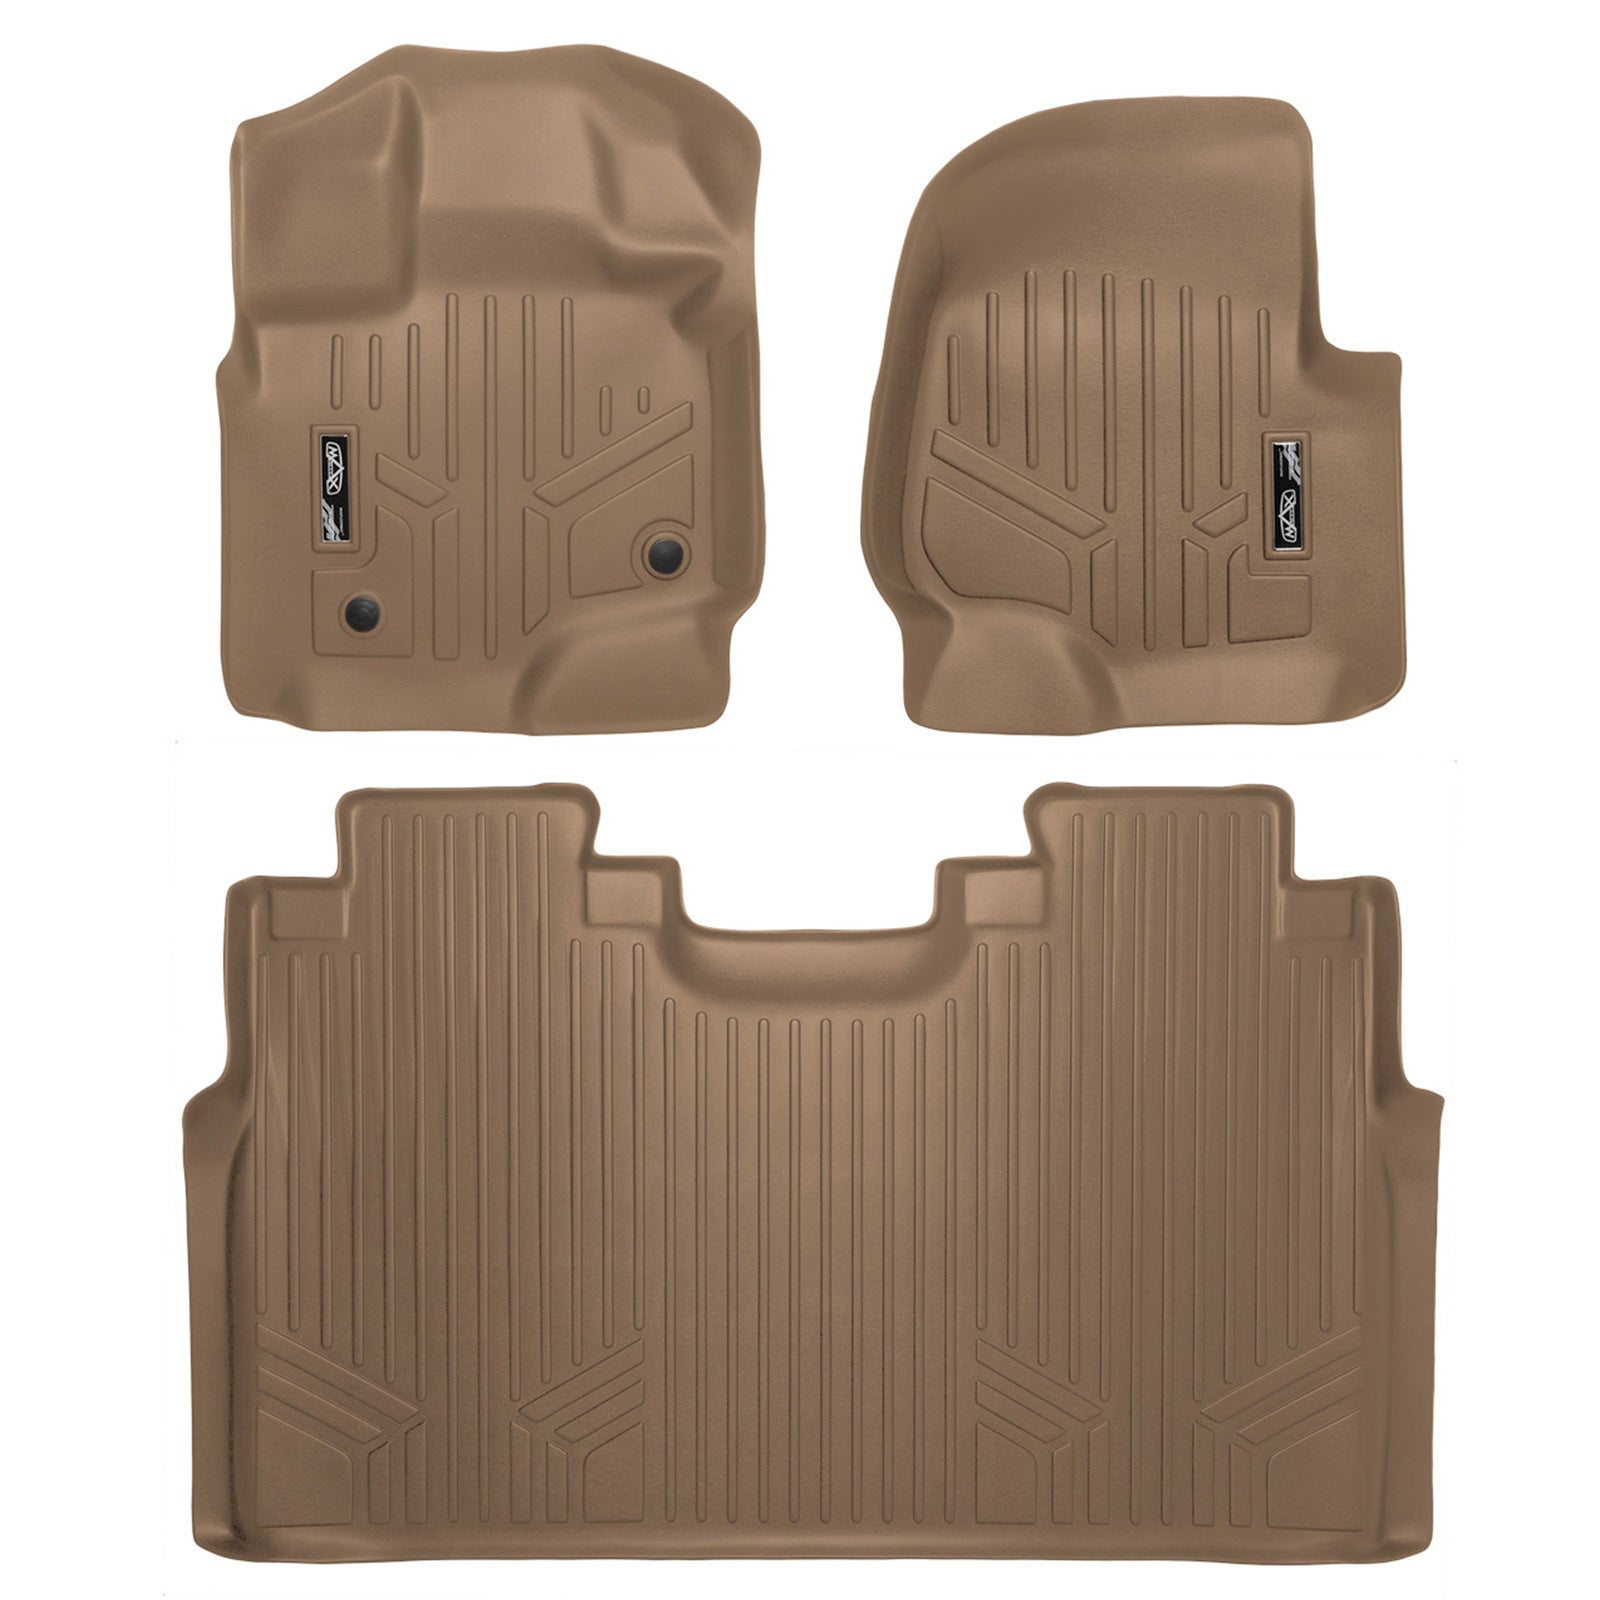 SMARTLINER Custom Fit for 2015-2019 Ford F-150 SuperCrew Cab with 1st Row Bucket Seats - Smartliner USA